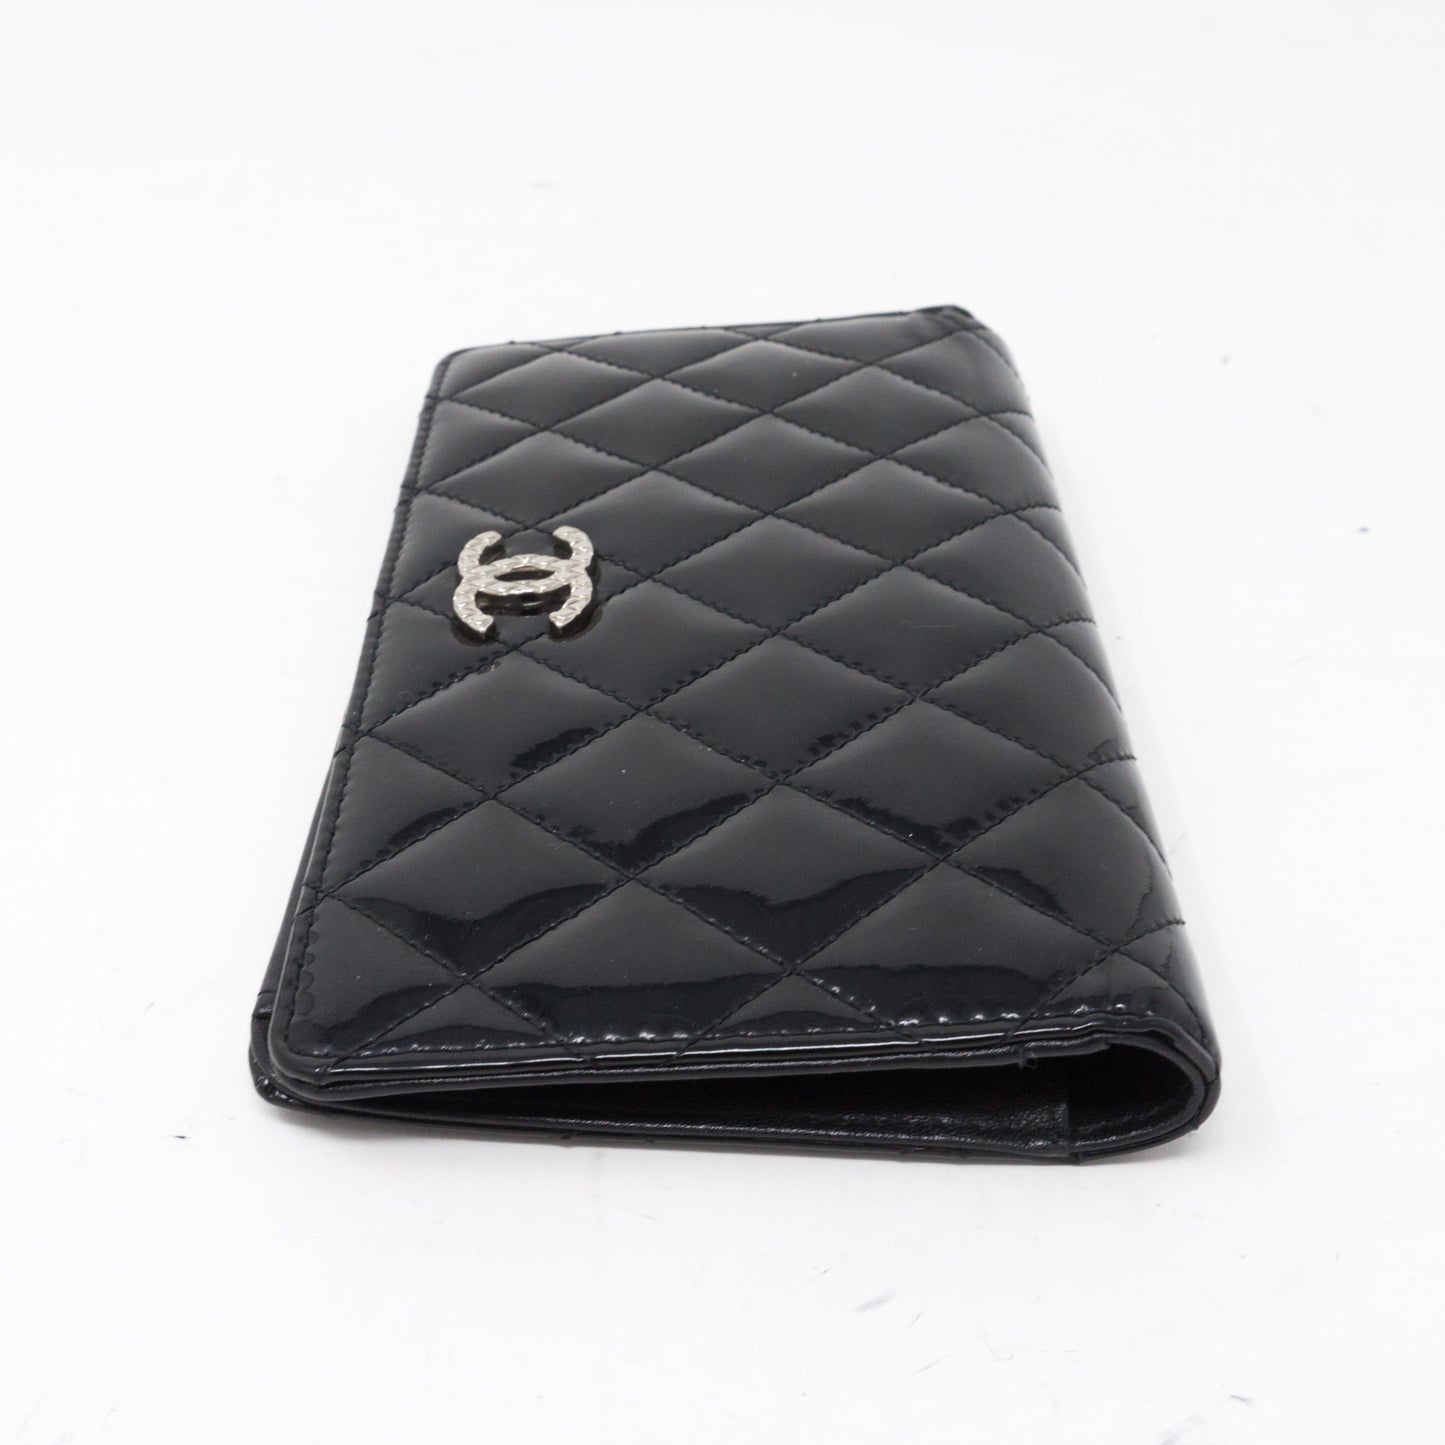 Authentic Chanel Vintage Timeless Flap Wallet Black Patent Leather LOVE 💗💗